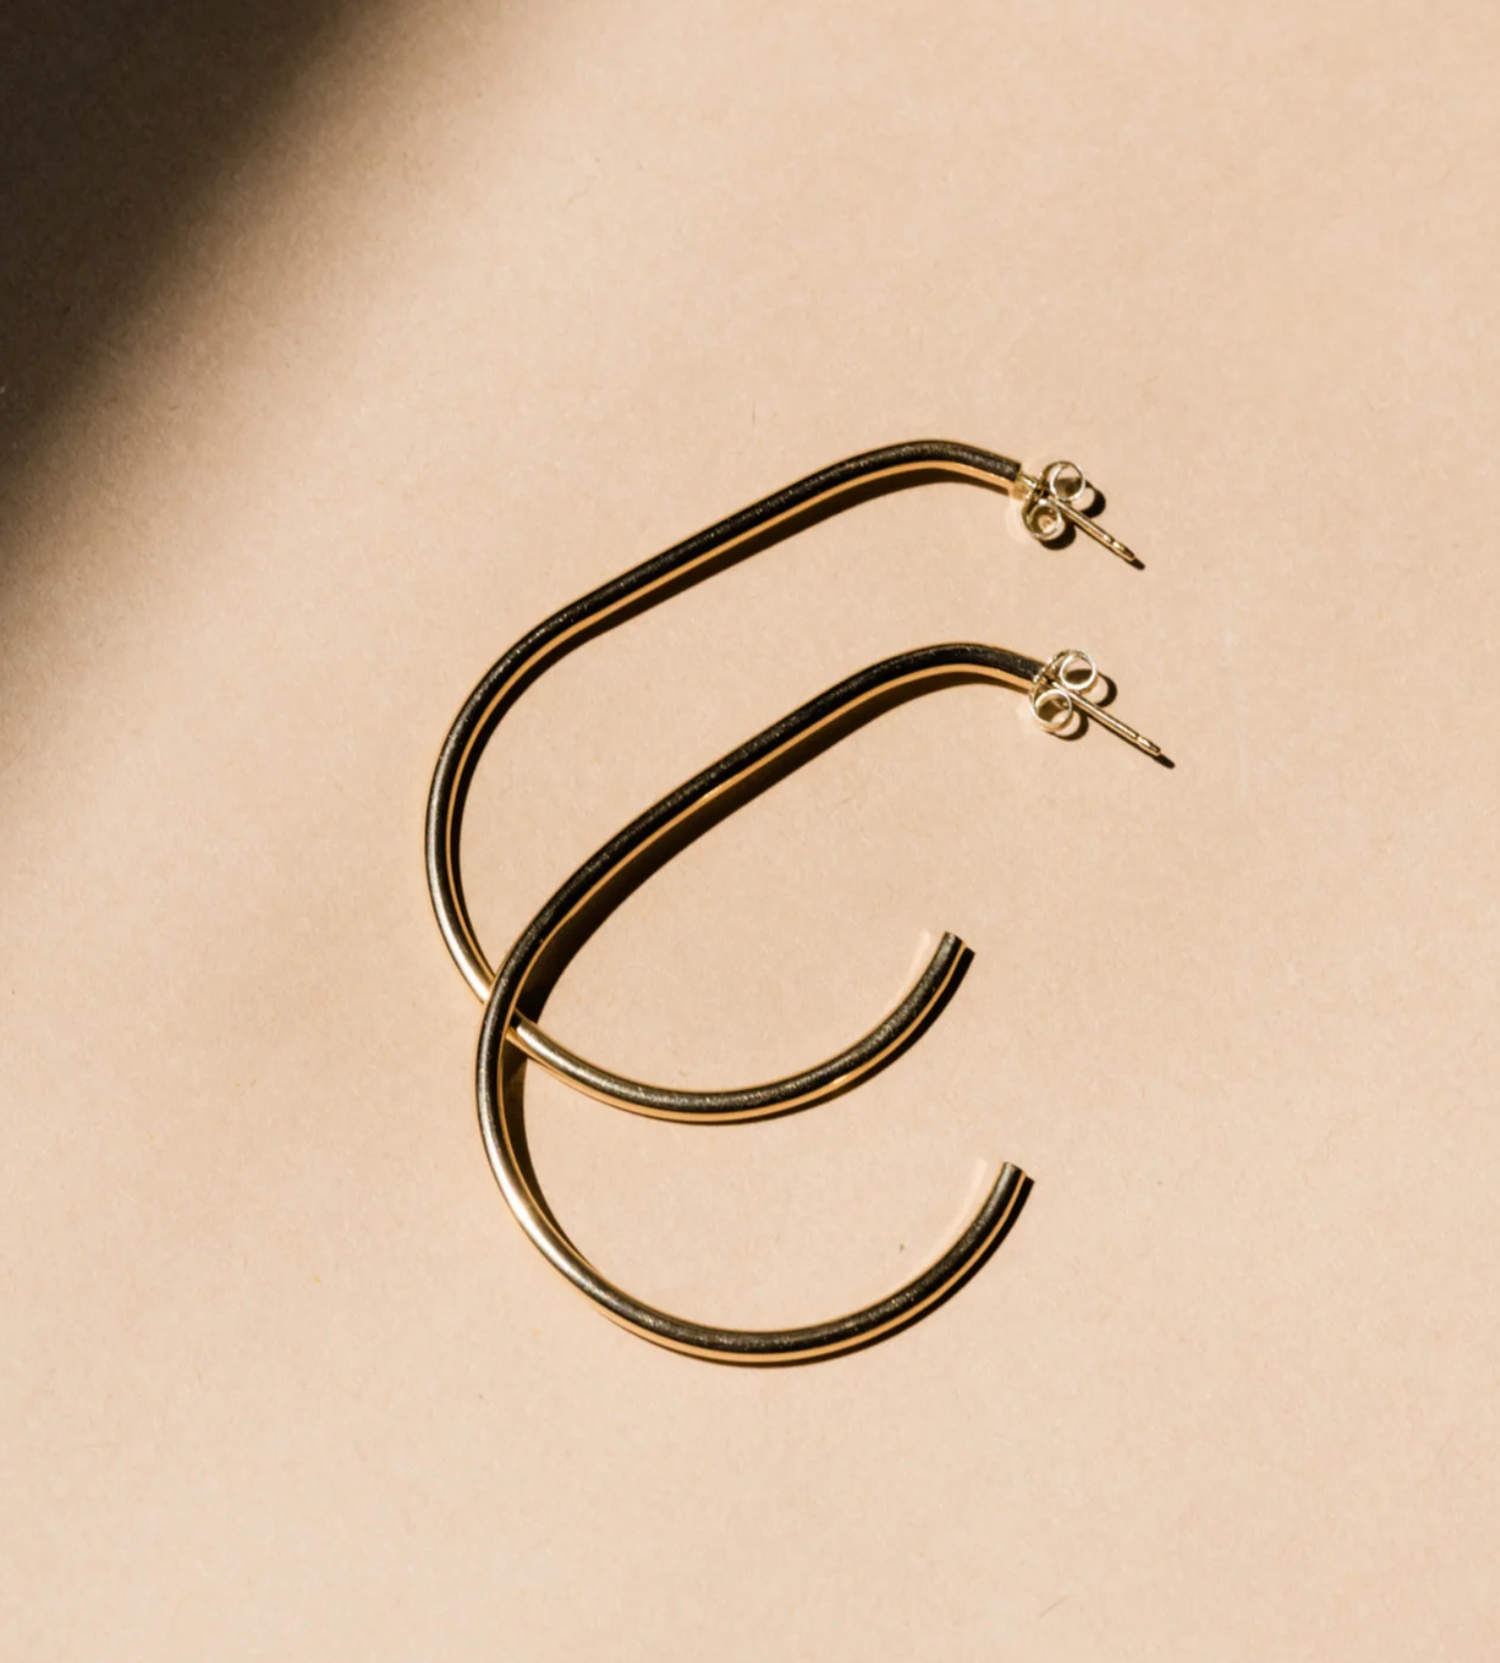 Able Pear Gold-Filled Hoops Earrings in  at Wrapsody